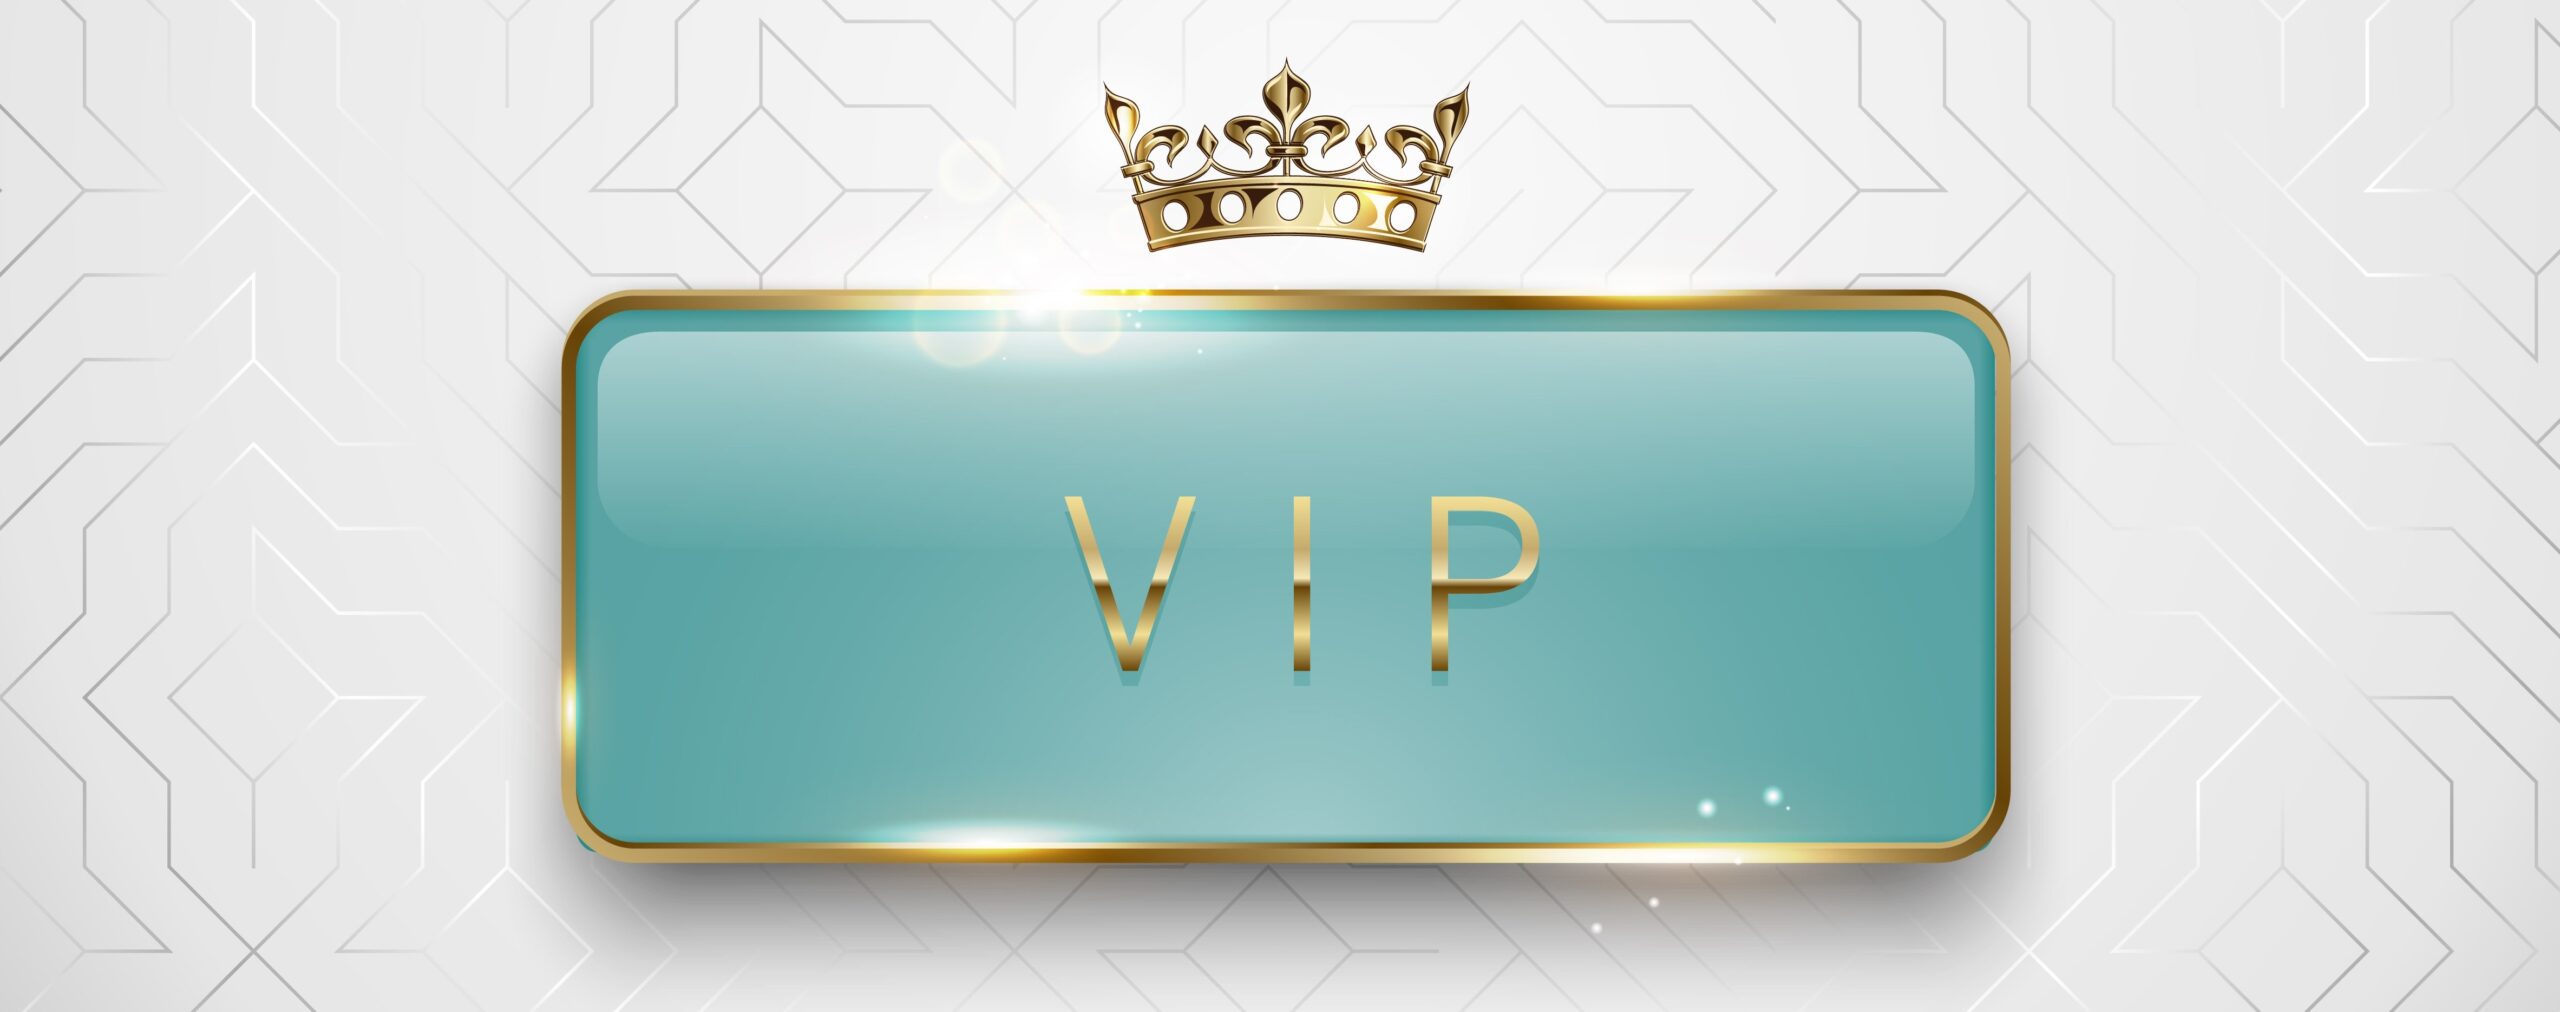 Gold, Silver and VIP: Free and paid loyalty tiers (Part 2)